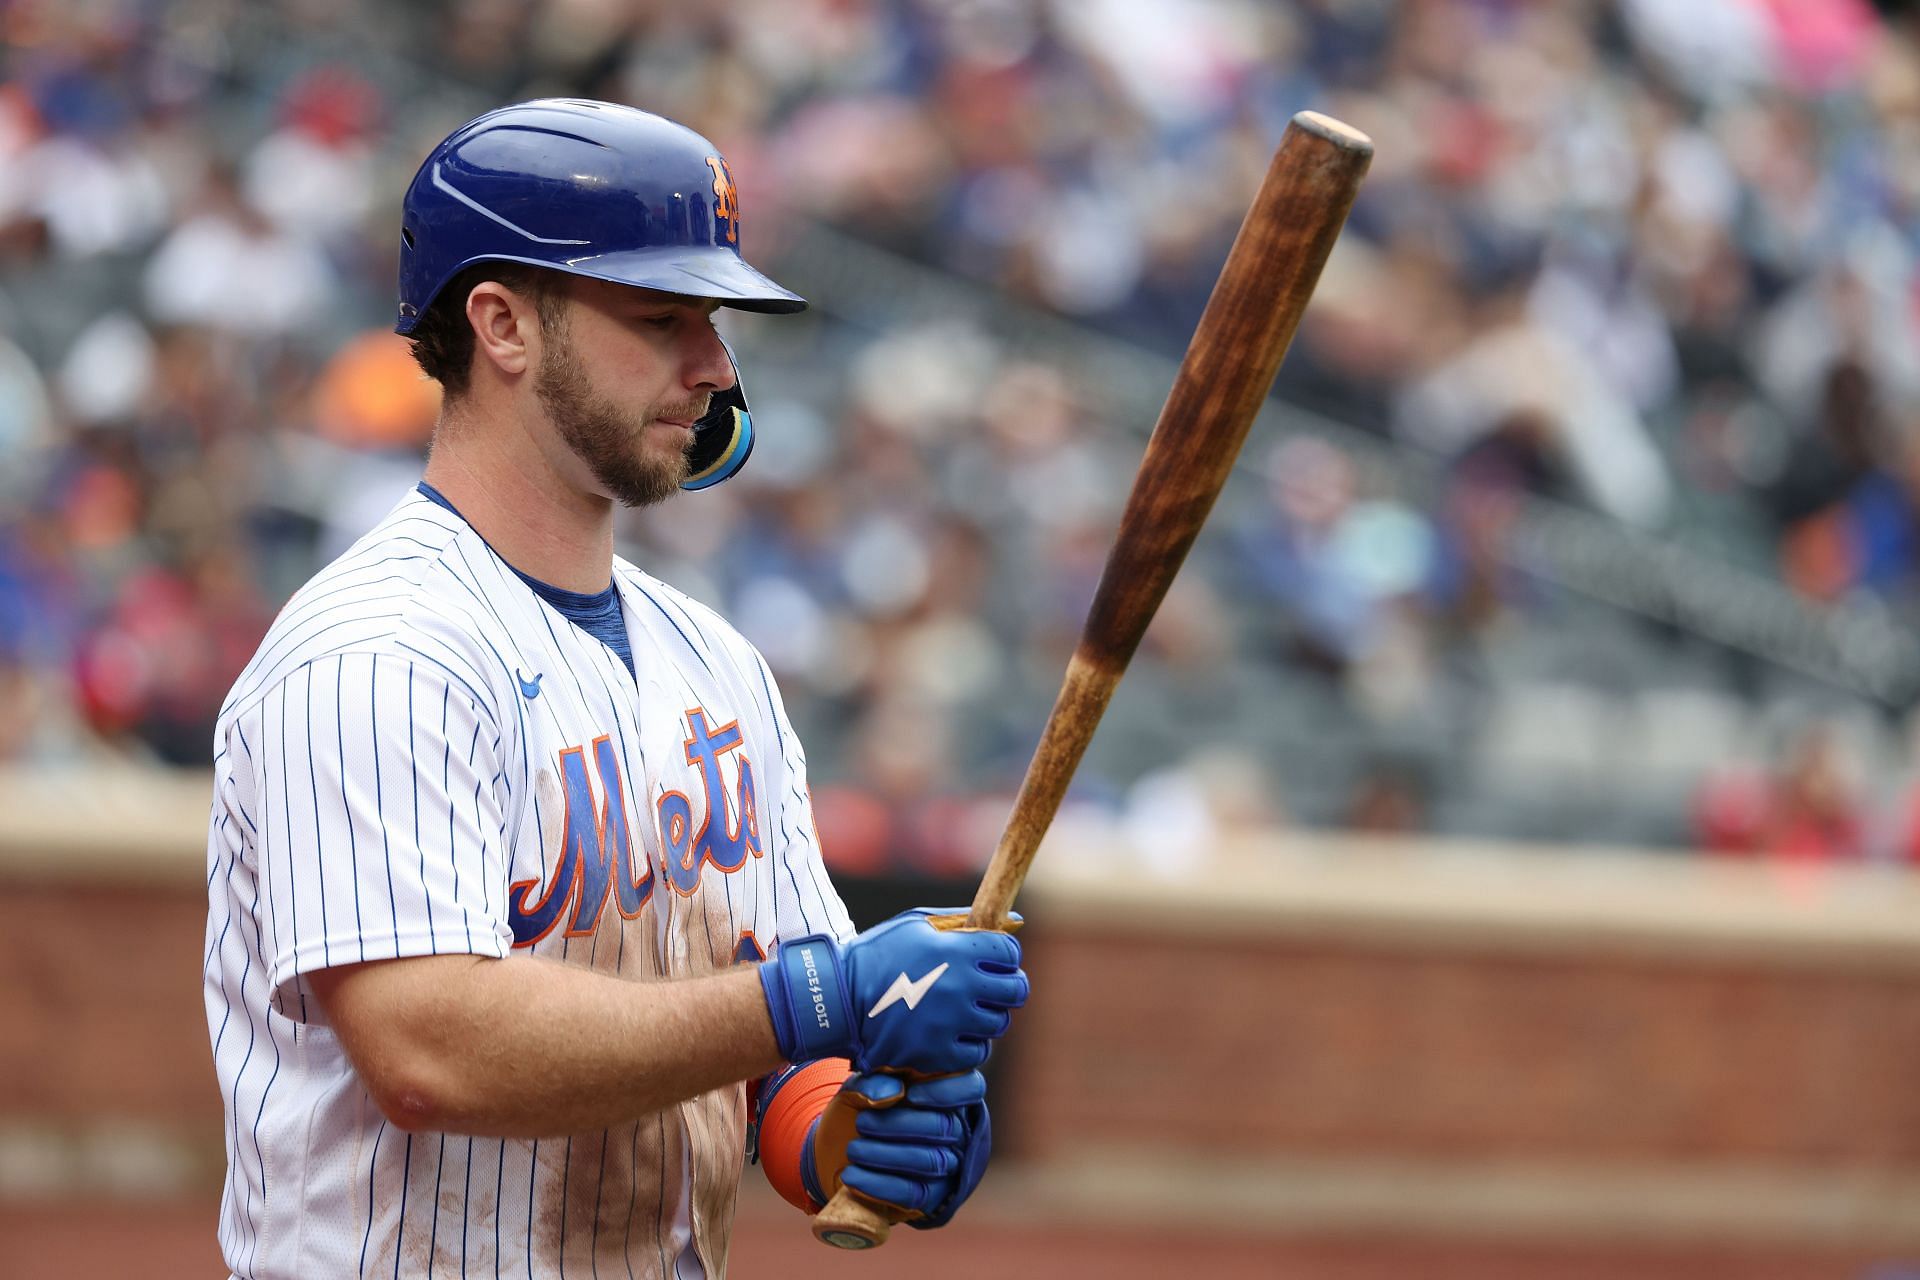 Pete Alonso has a superb start to the season.